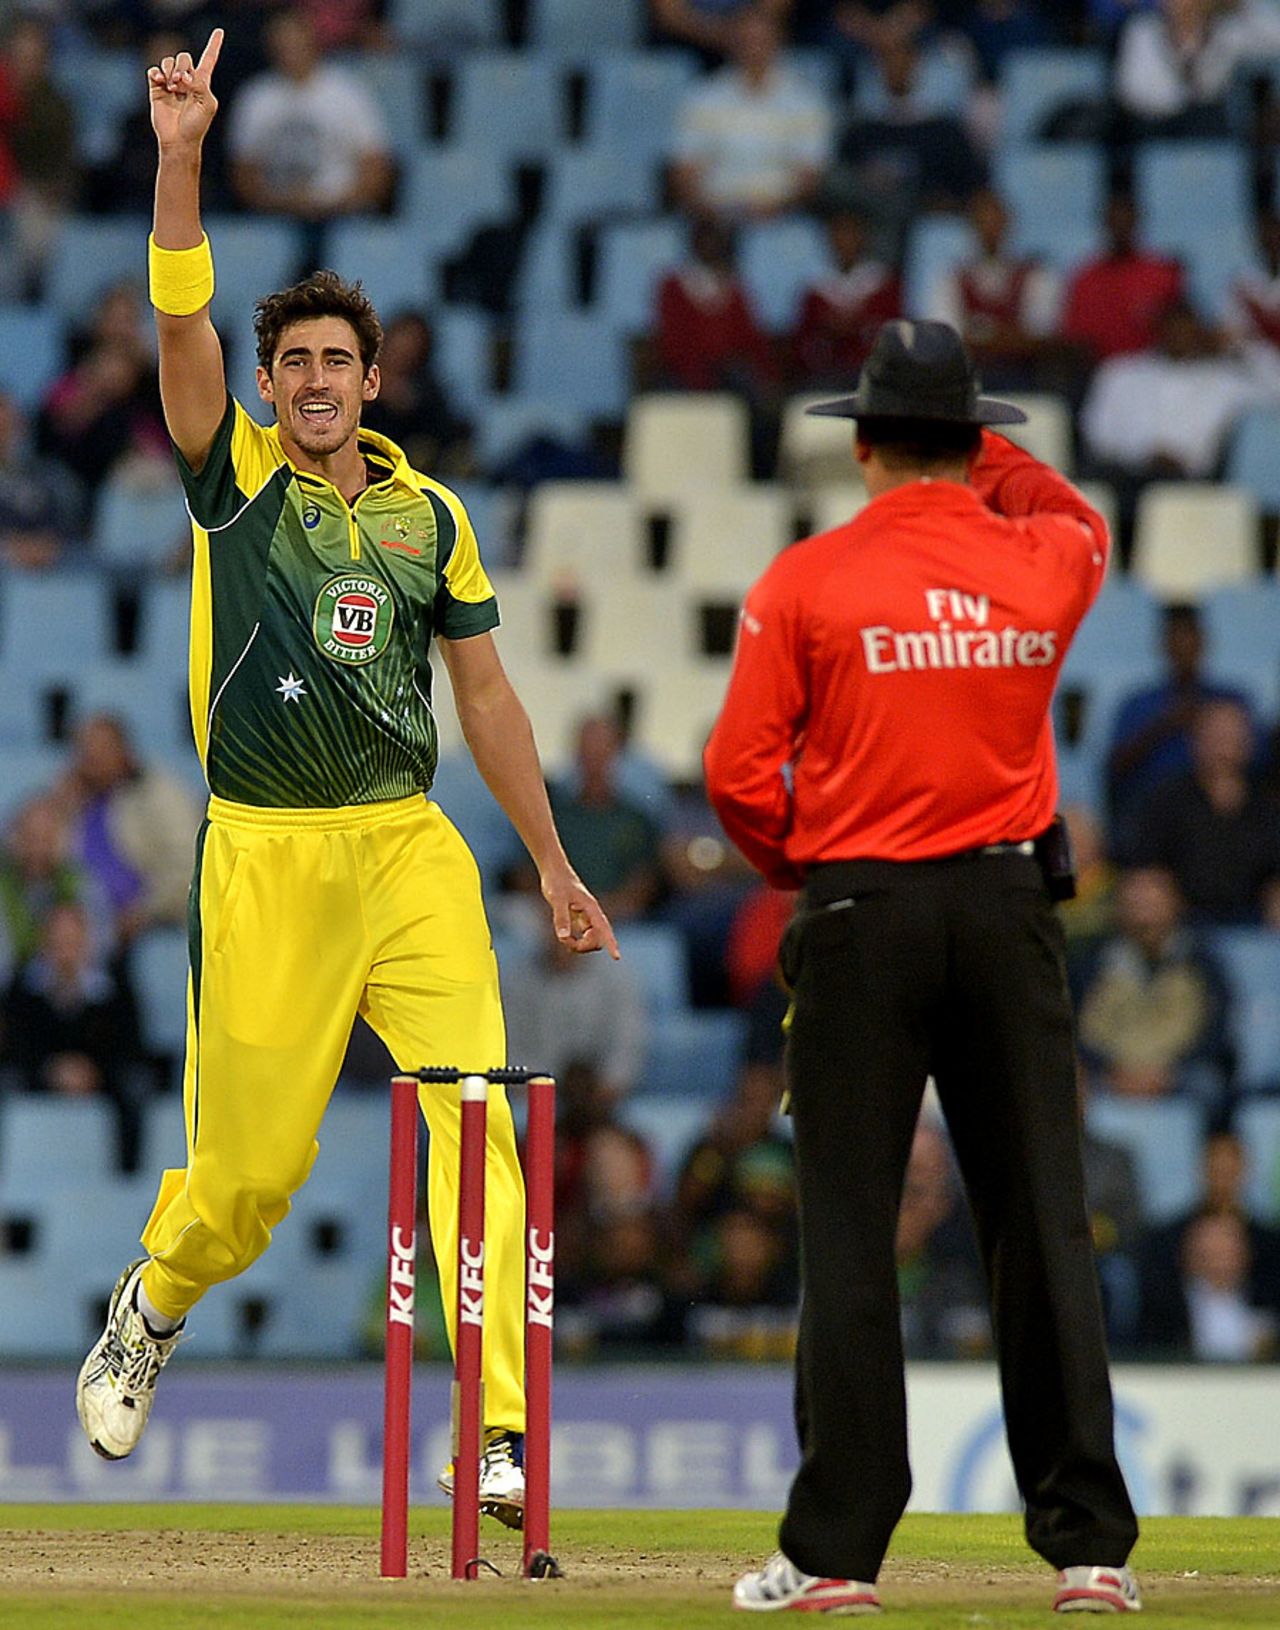 Mitchell Starc wins an lbw appeal early in the innings, South Africa v Australia, 3rd T20, Centurion, March 14, 2014